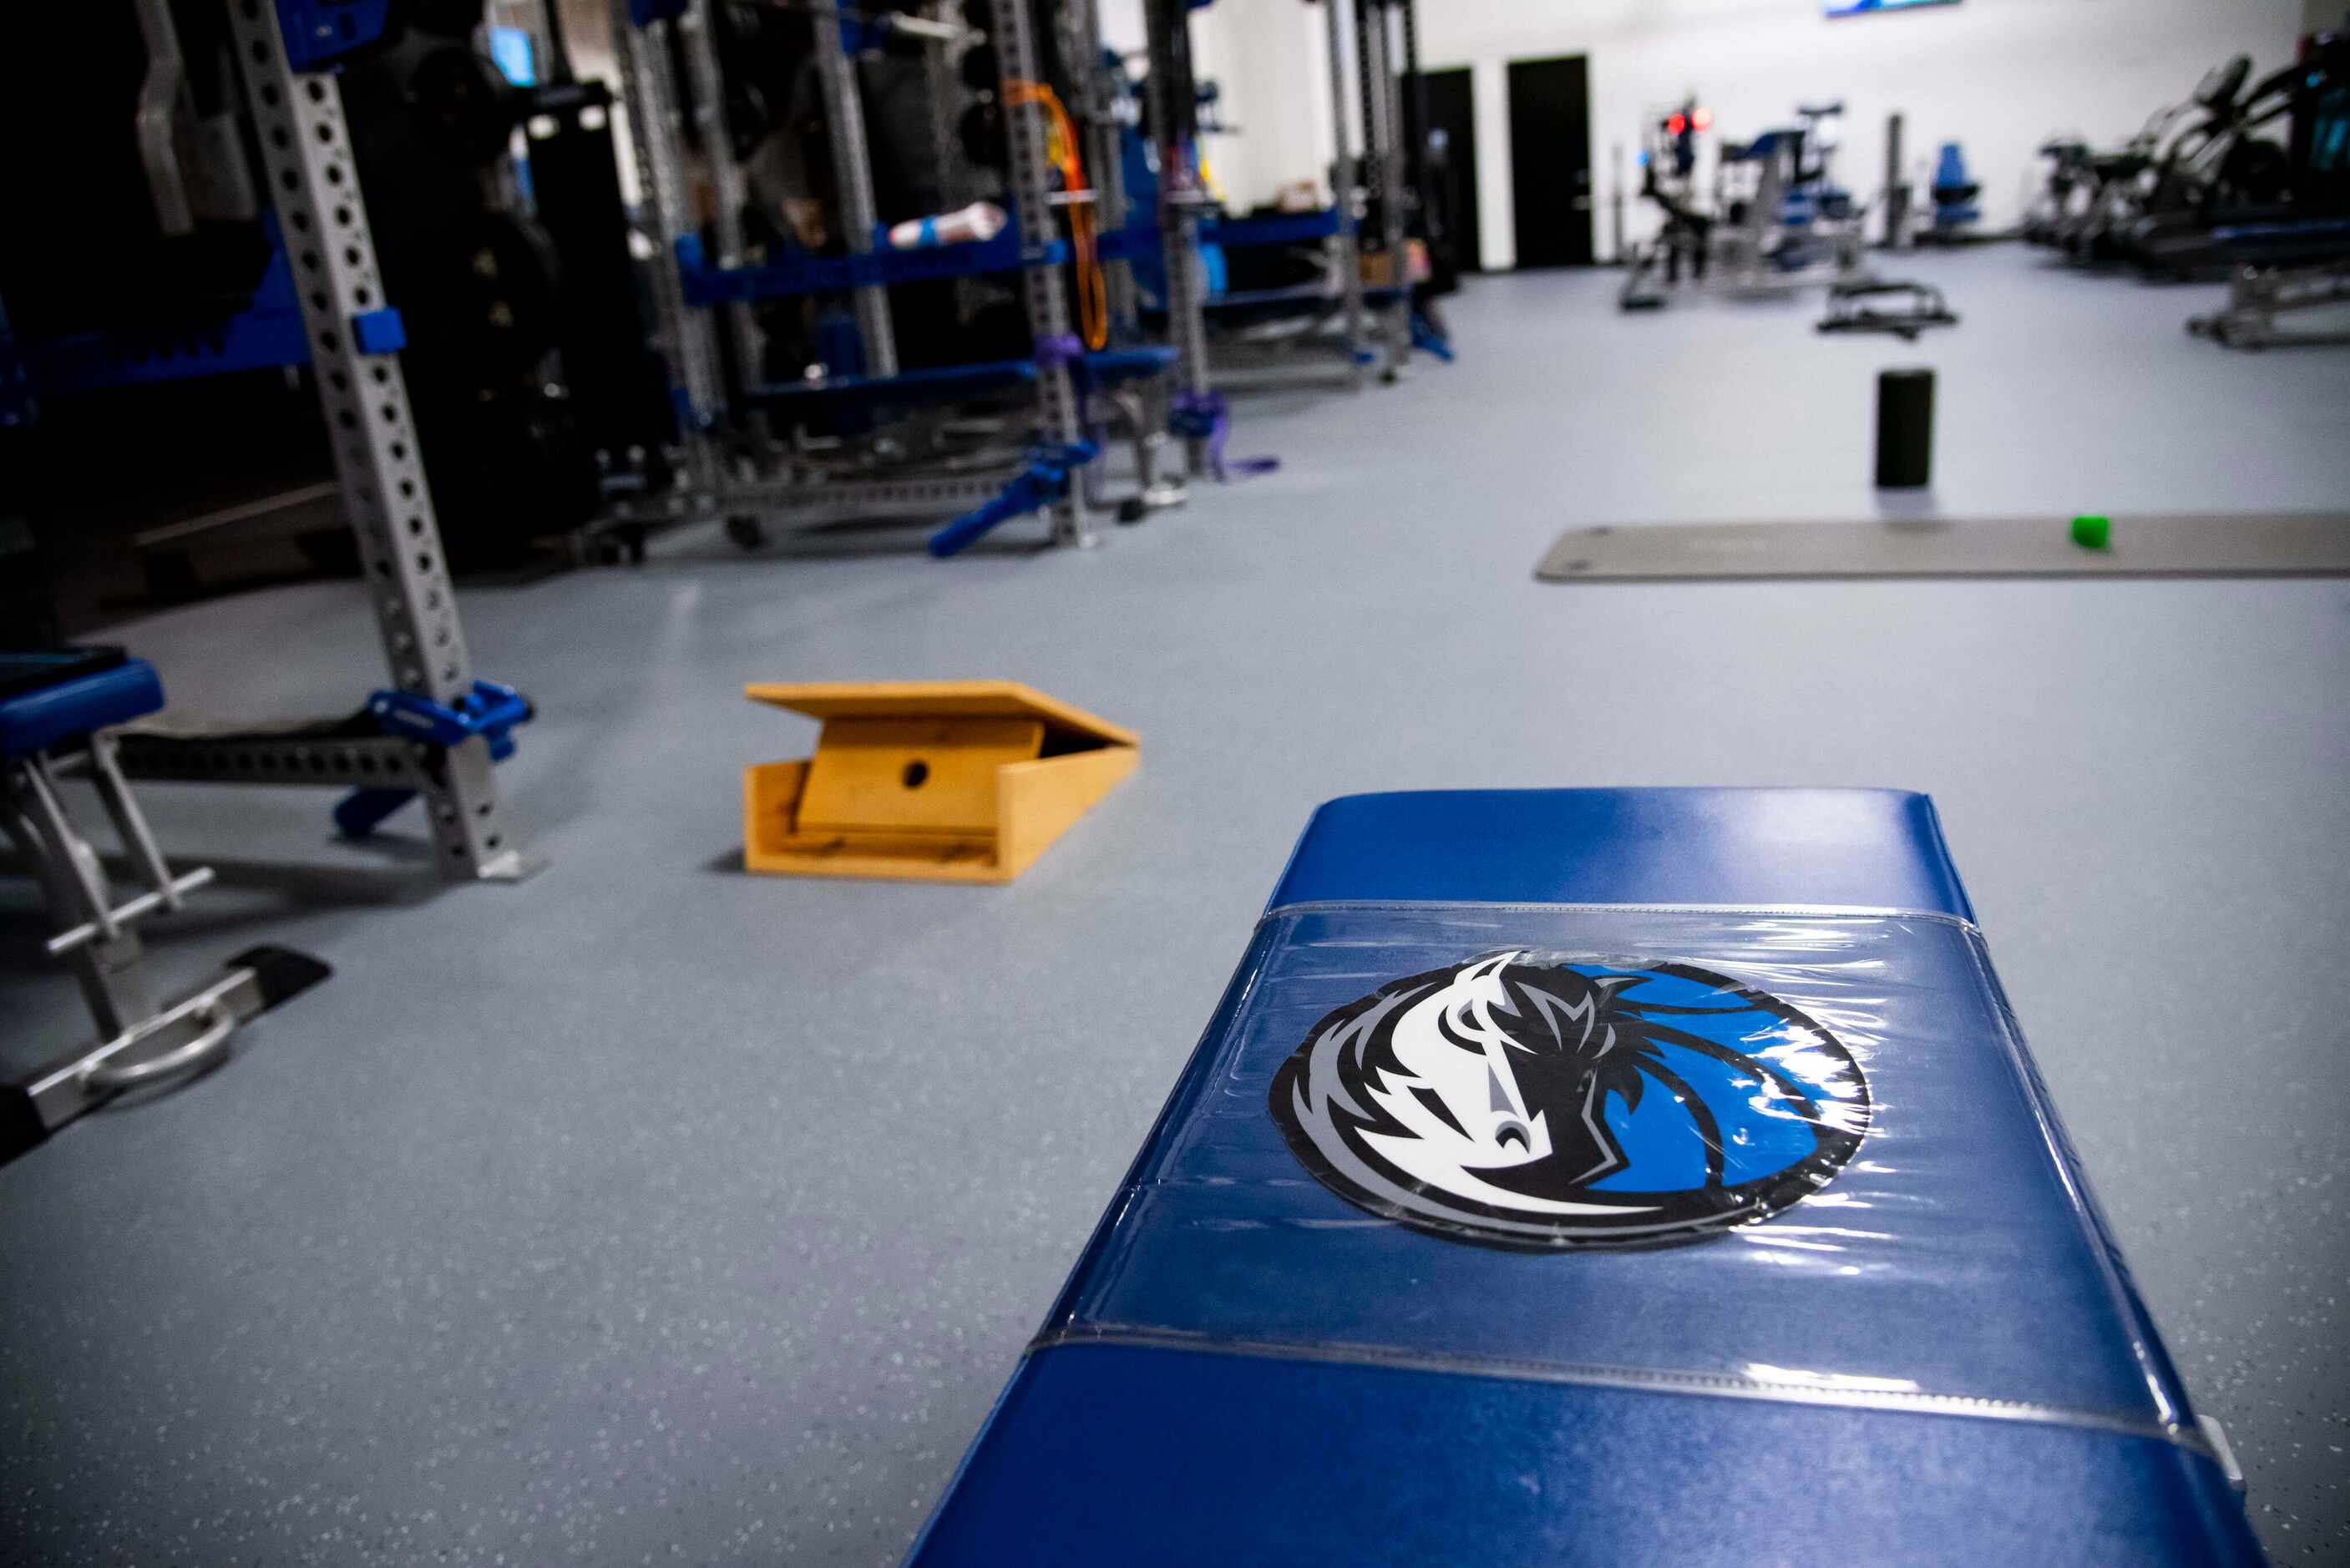 A bench lies in the new weight room area at the Dallas Mavericks BioSteel Practice Center in...